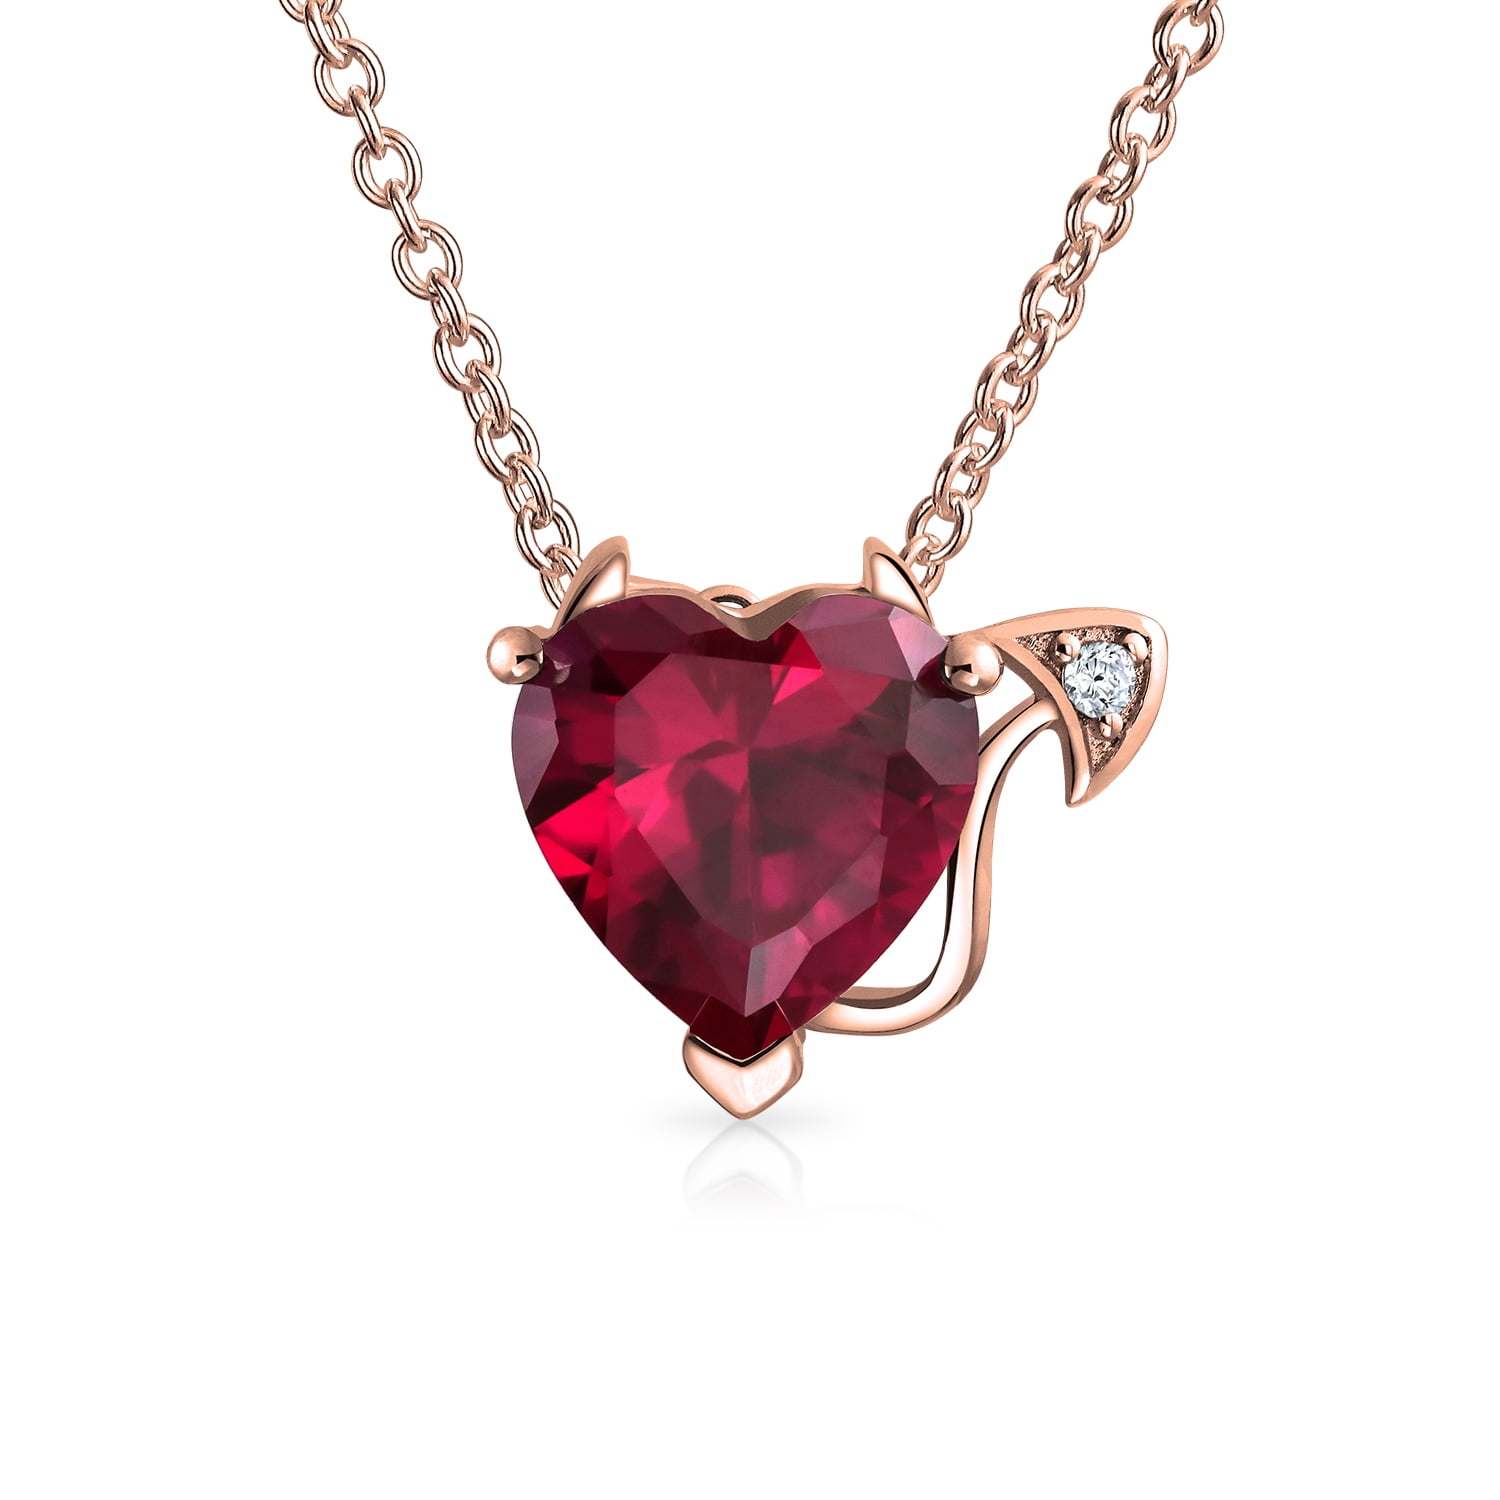 925 Sterling Silver Pendants Necklace Heart Red Ruby Love Pendant Fine Jewelry For Women Fashion Without Chain